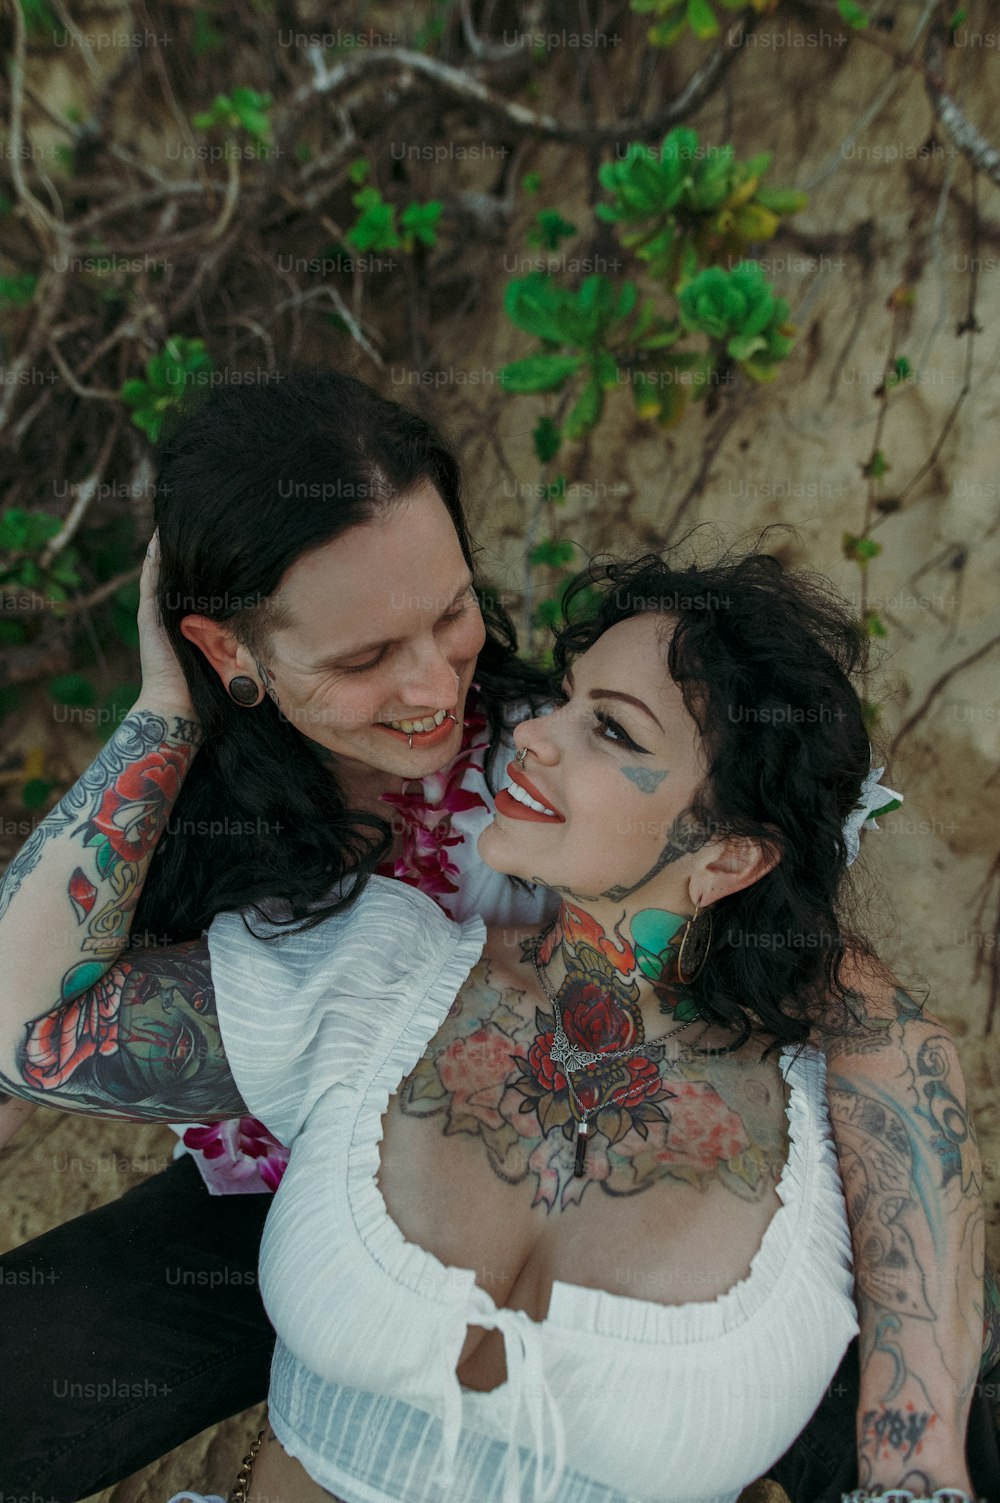 a woman with tattoos sitting next to a man